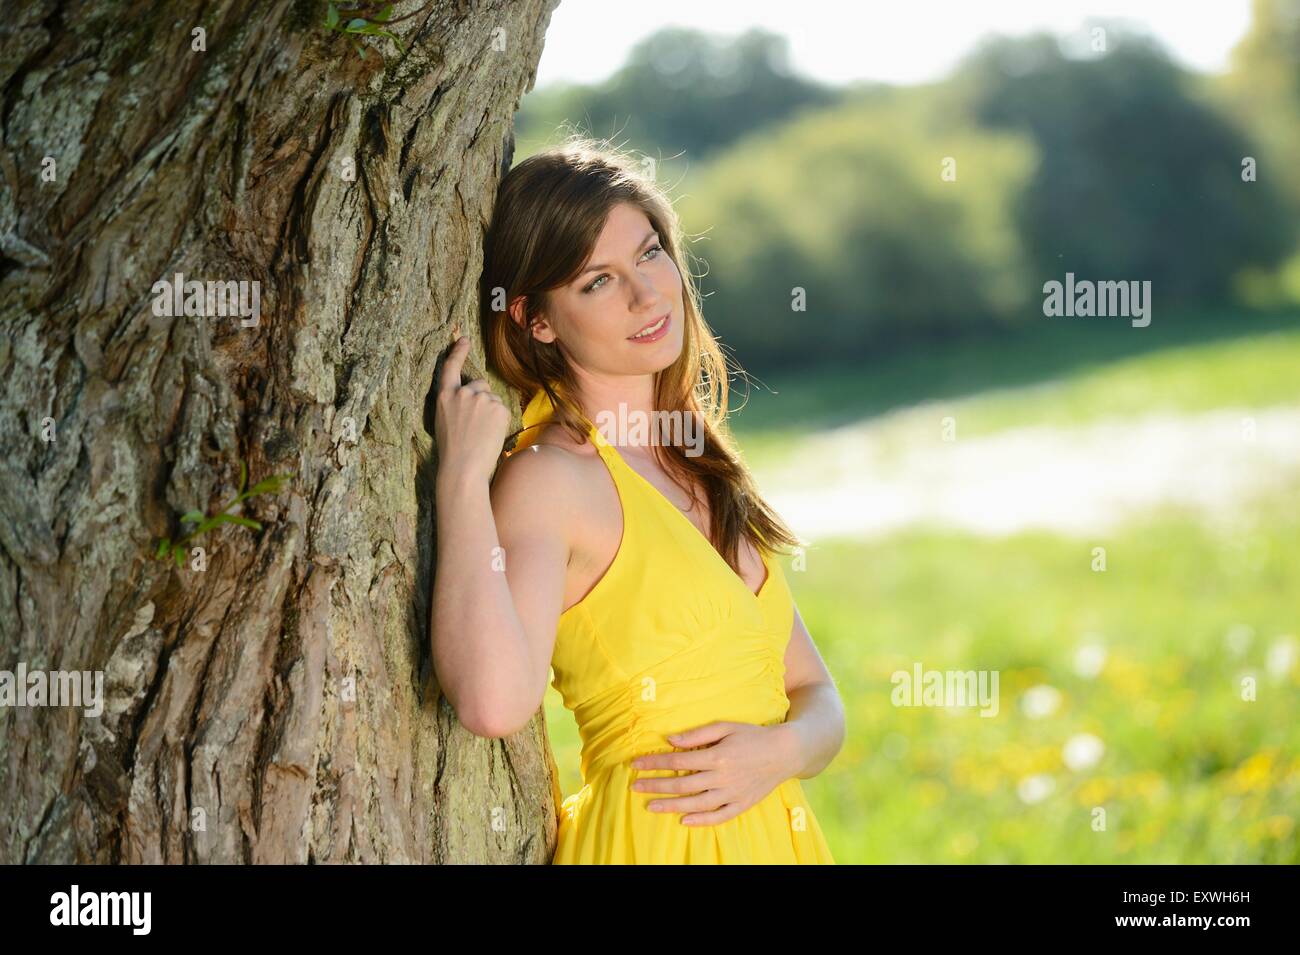 Young woman at a tree, Bavaria, Germany, Europe Stock Photo